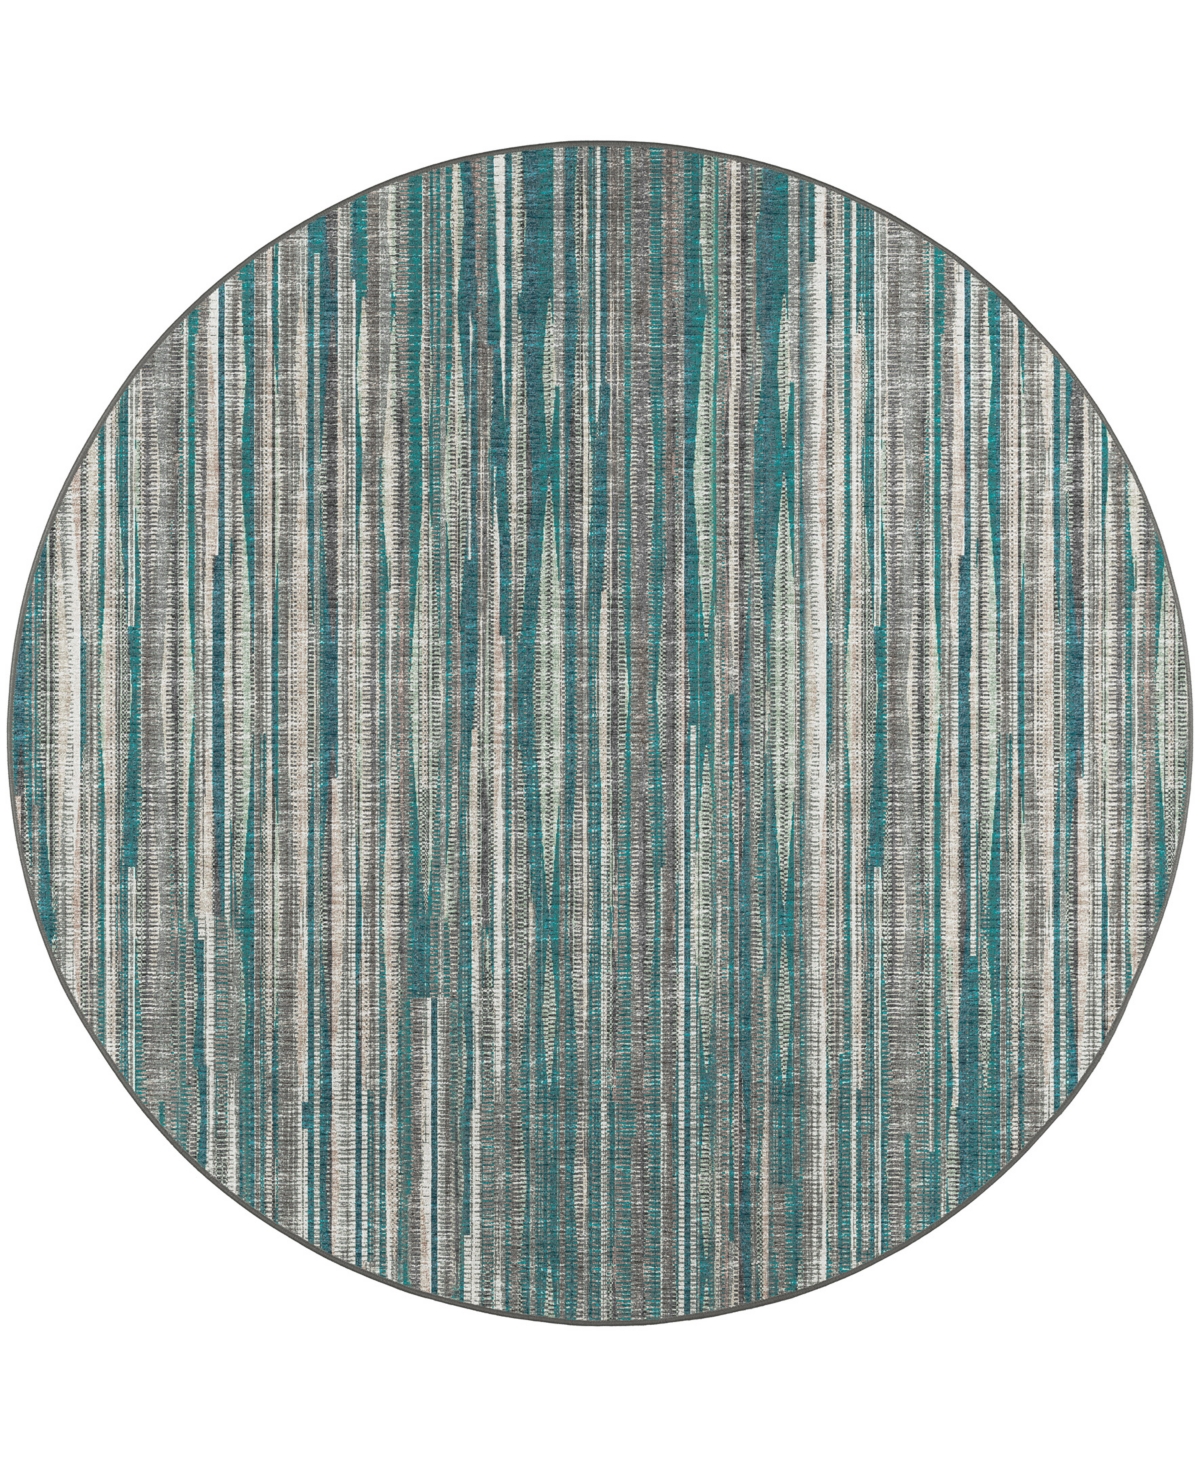 D Style Sutter Stt-1 4' X 4' Round Area Rug In Teal